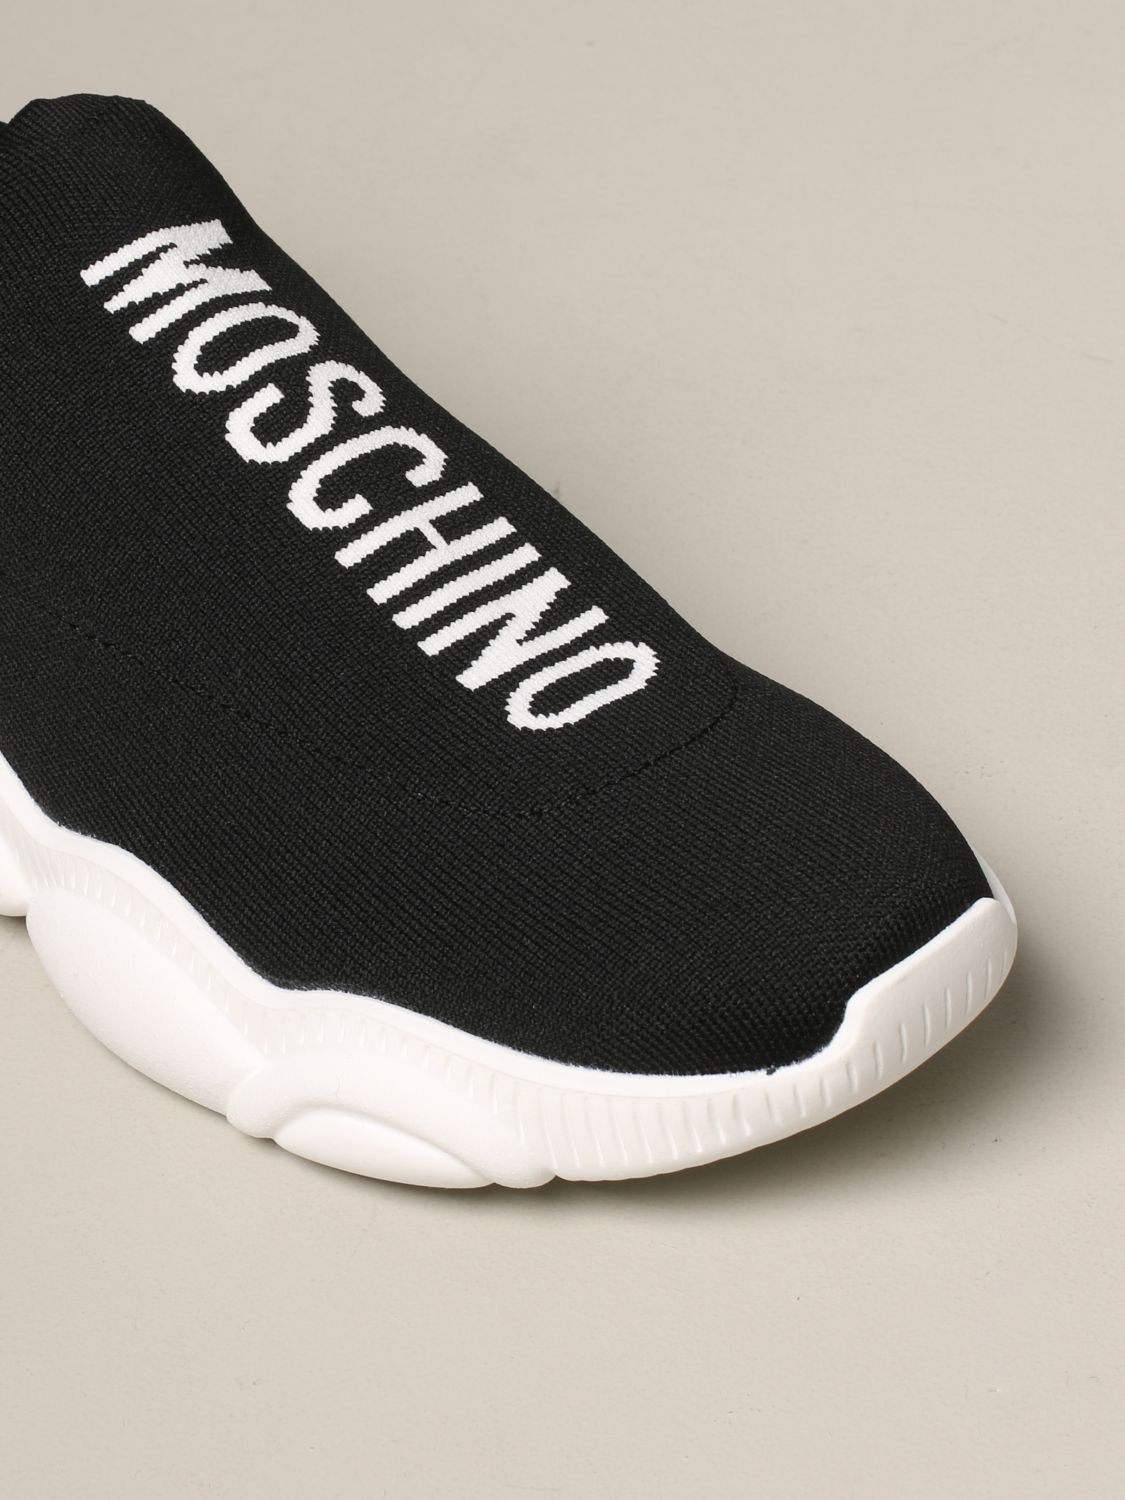 MOSCHINO Couture MB1550 810 Chaussures Hommes Men/'s Chaussures W0.LM148